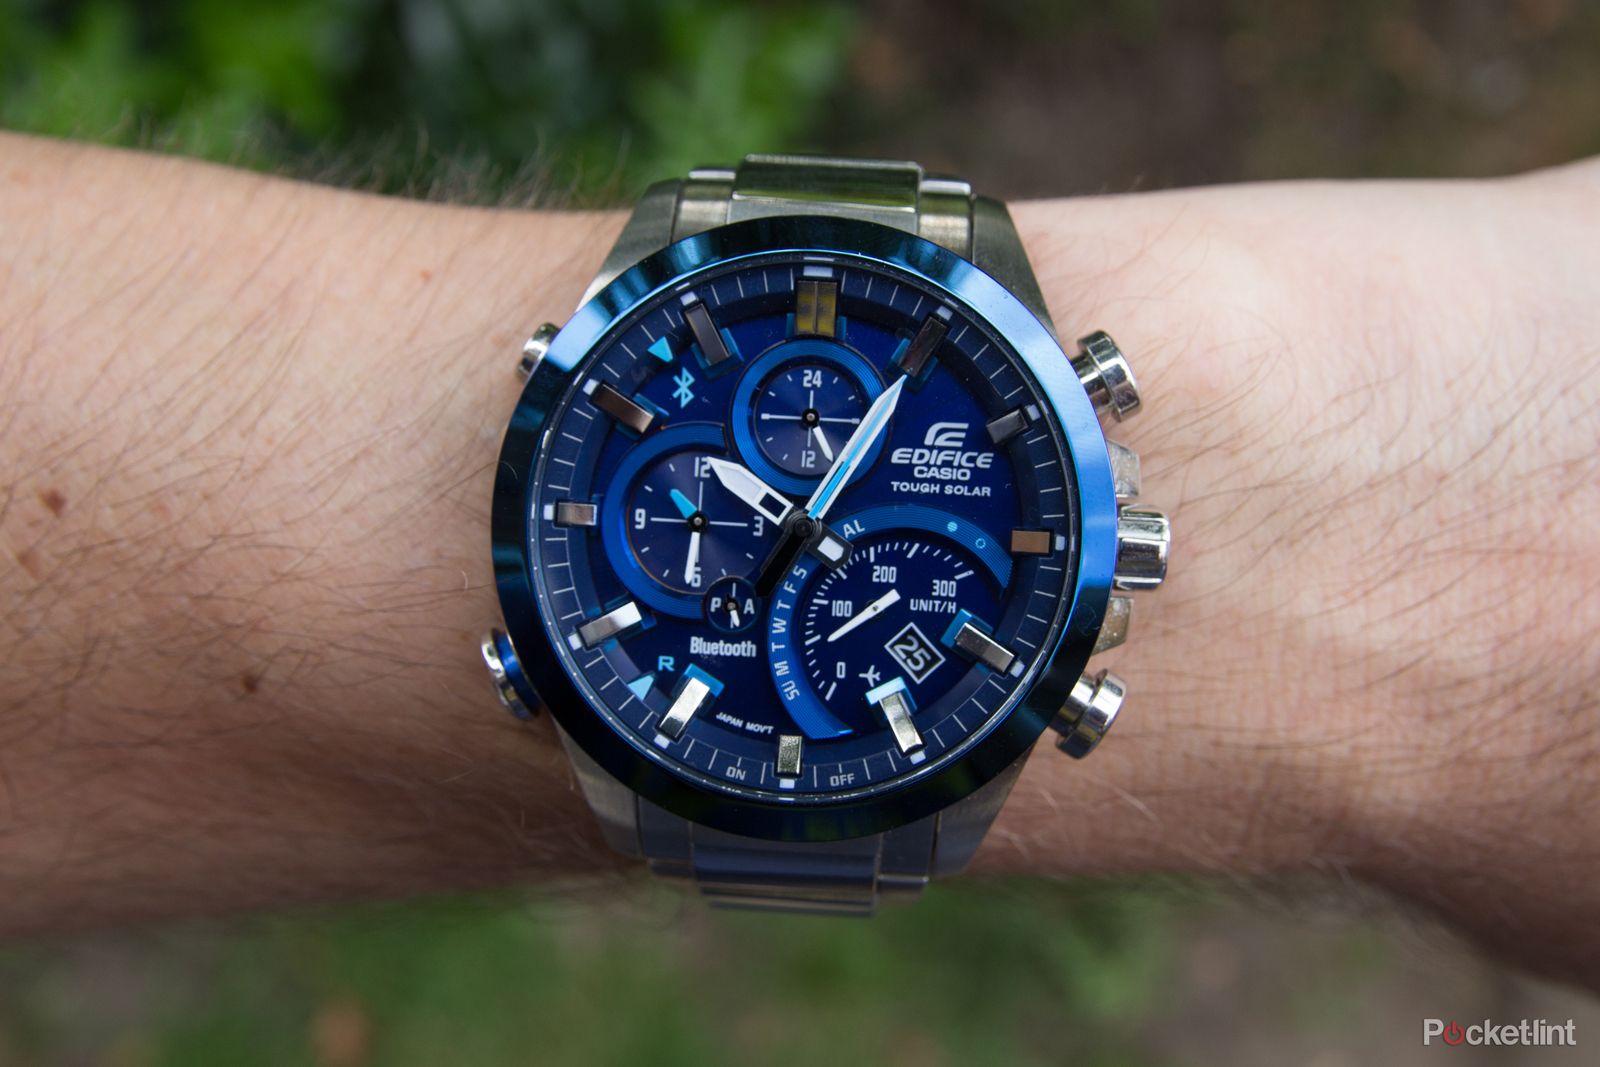 Casio Edifice EQB-500: Watch first, connected device second